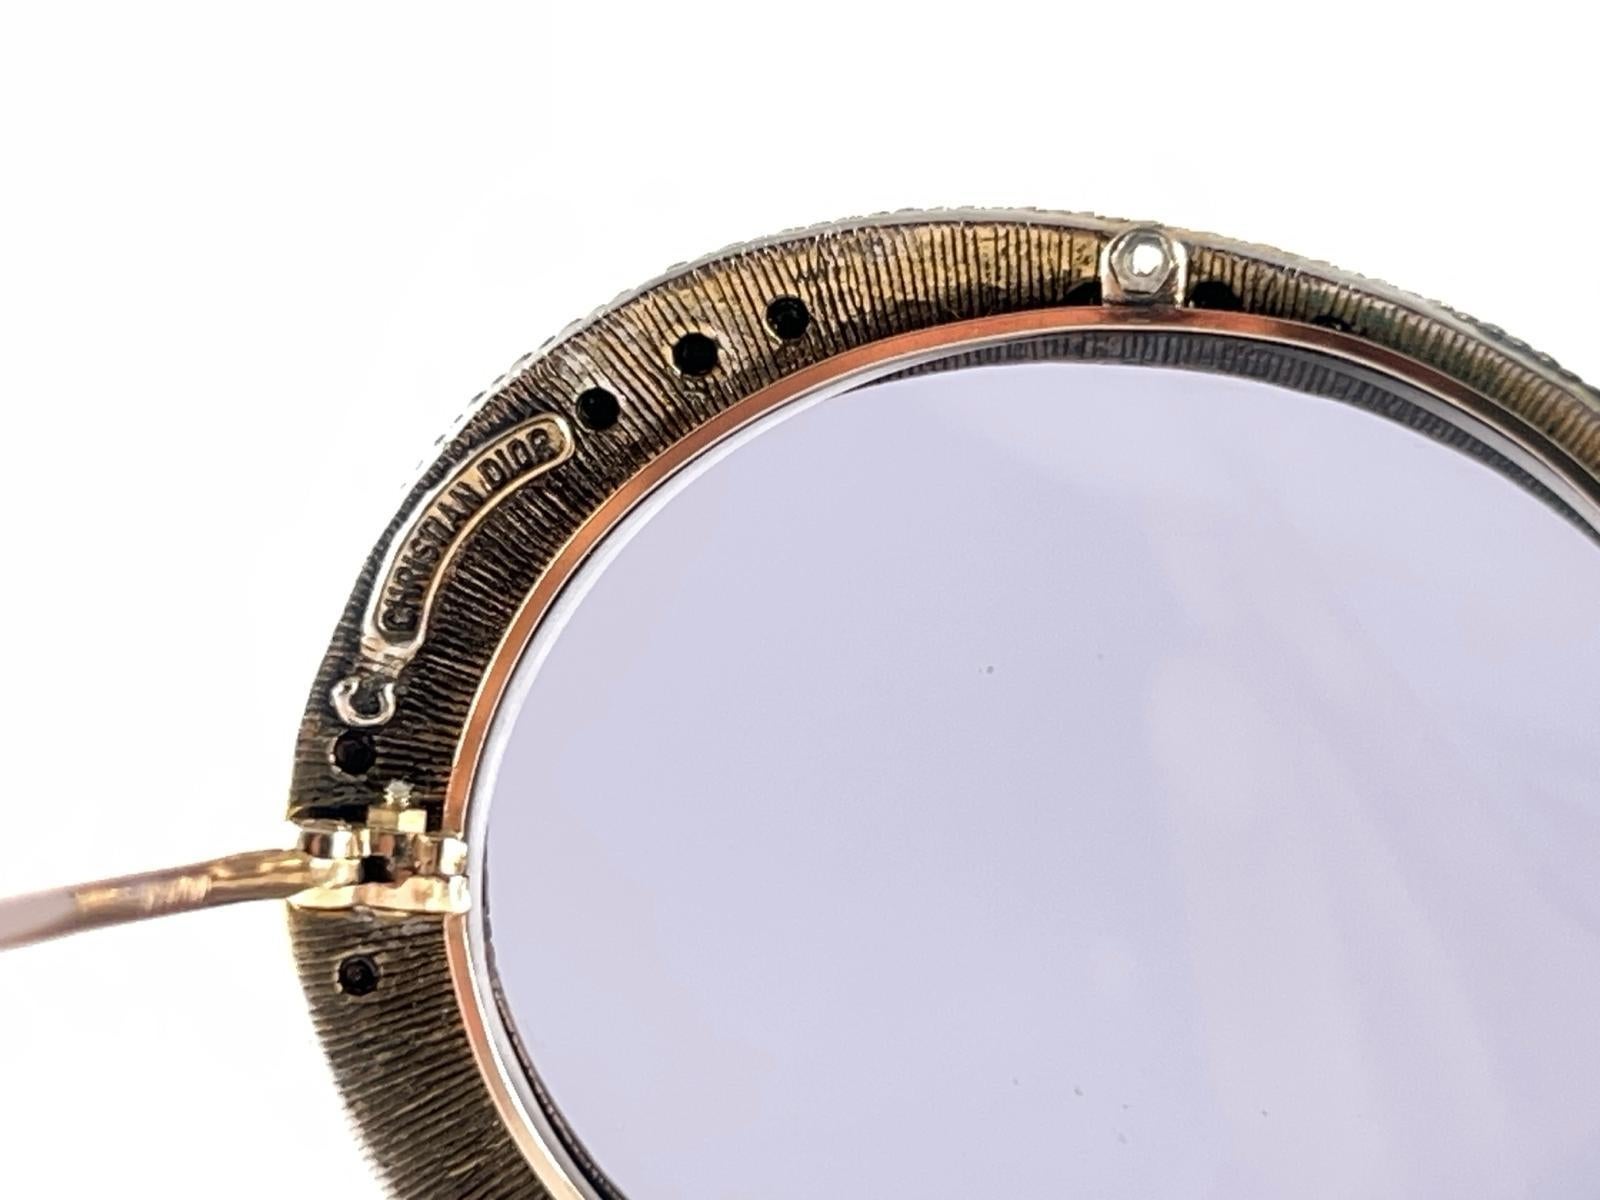 Ultra Rare 1960 Christian Dior Enamel Jewelled by Tura Collector Item Sunglasses For Sale 1